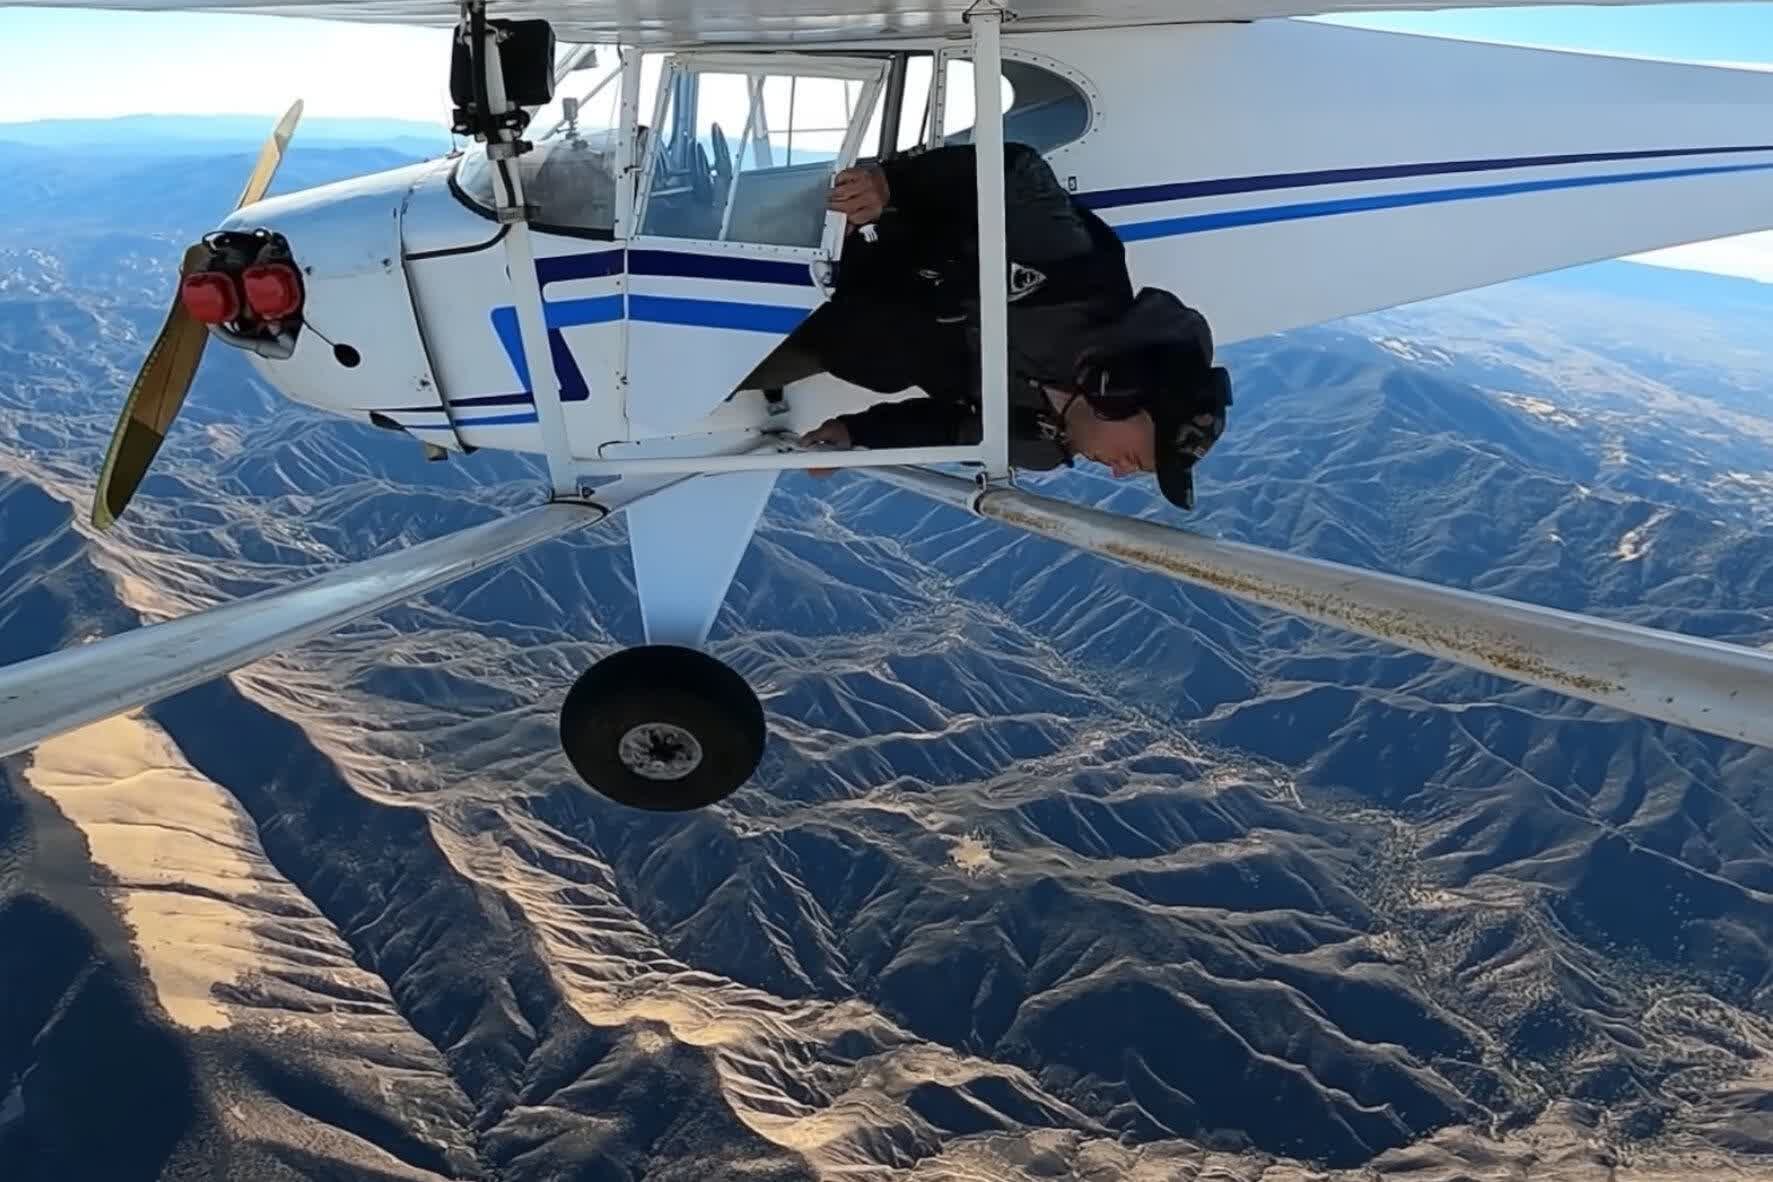 YouTuber loses pilot license after FAA claims he intentionally crashed his plane